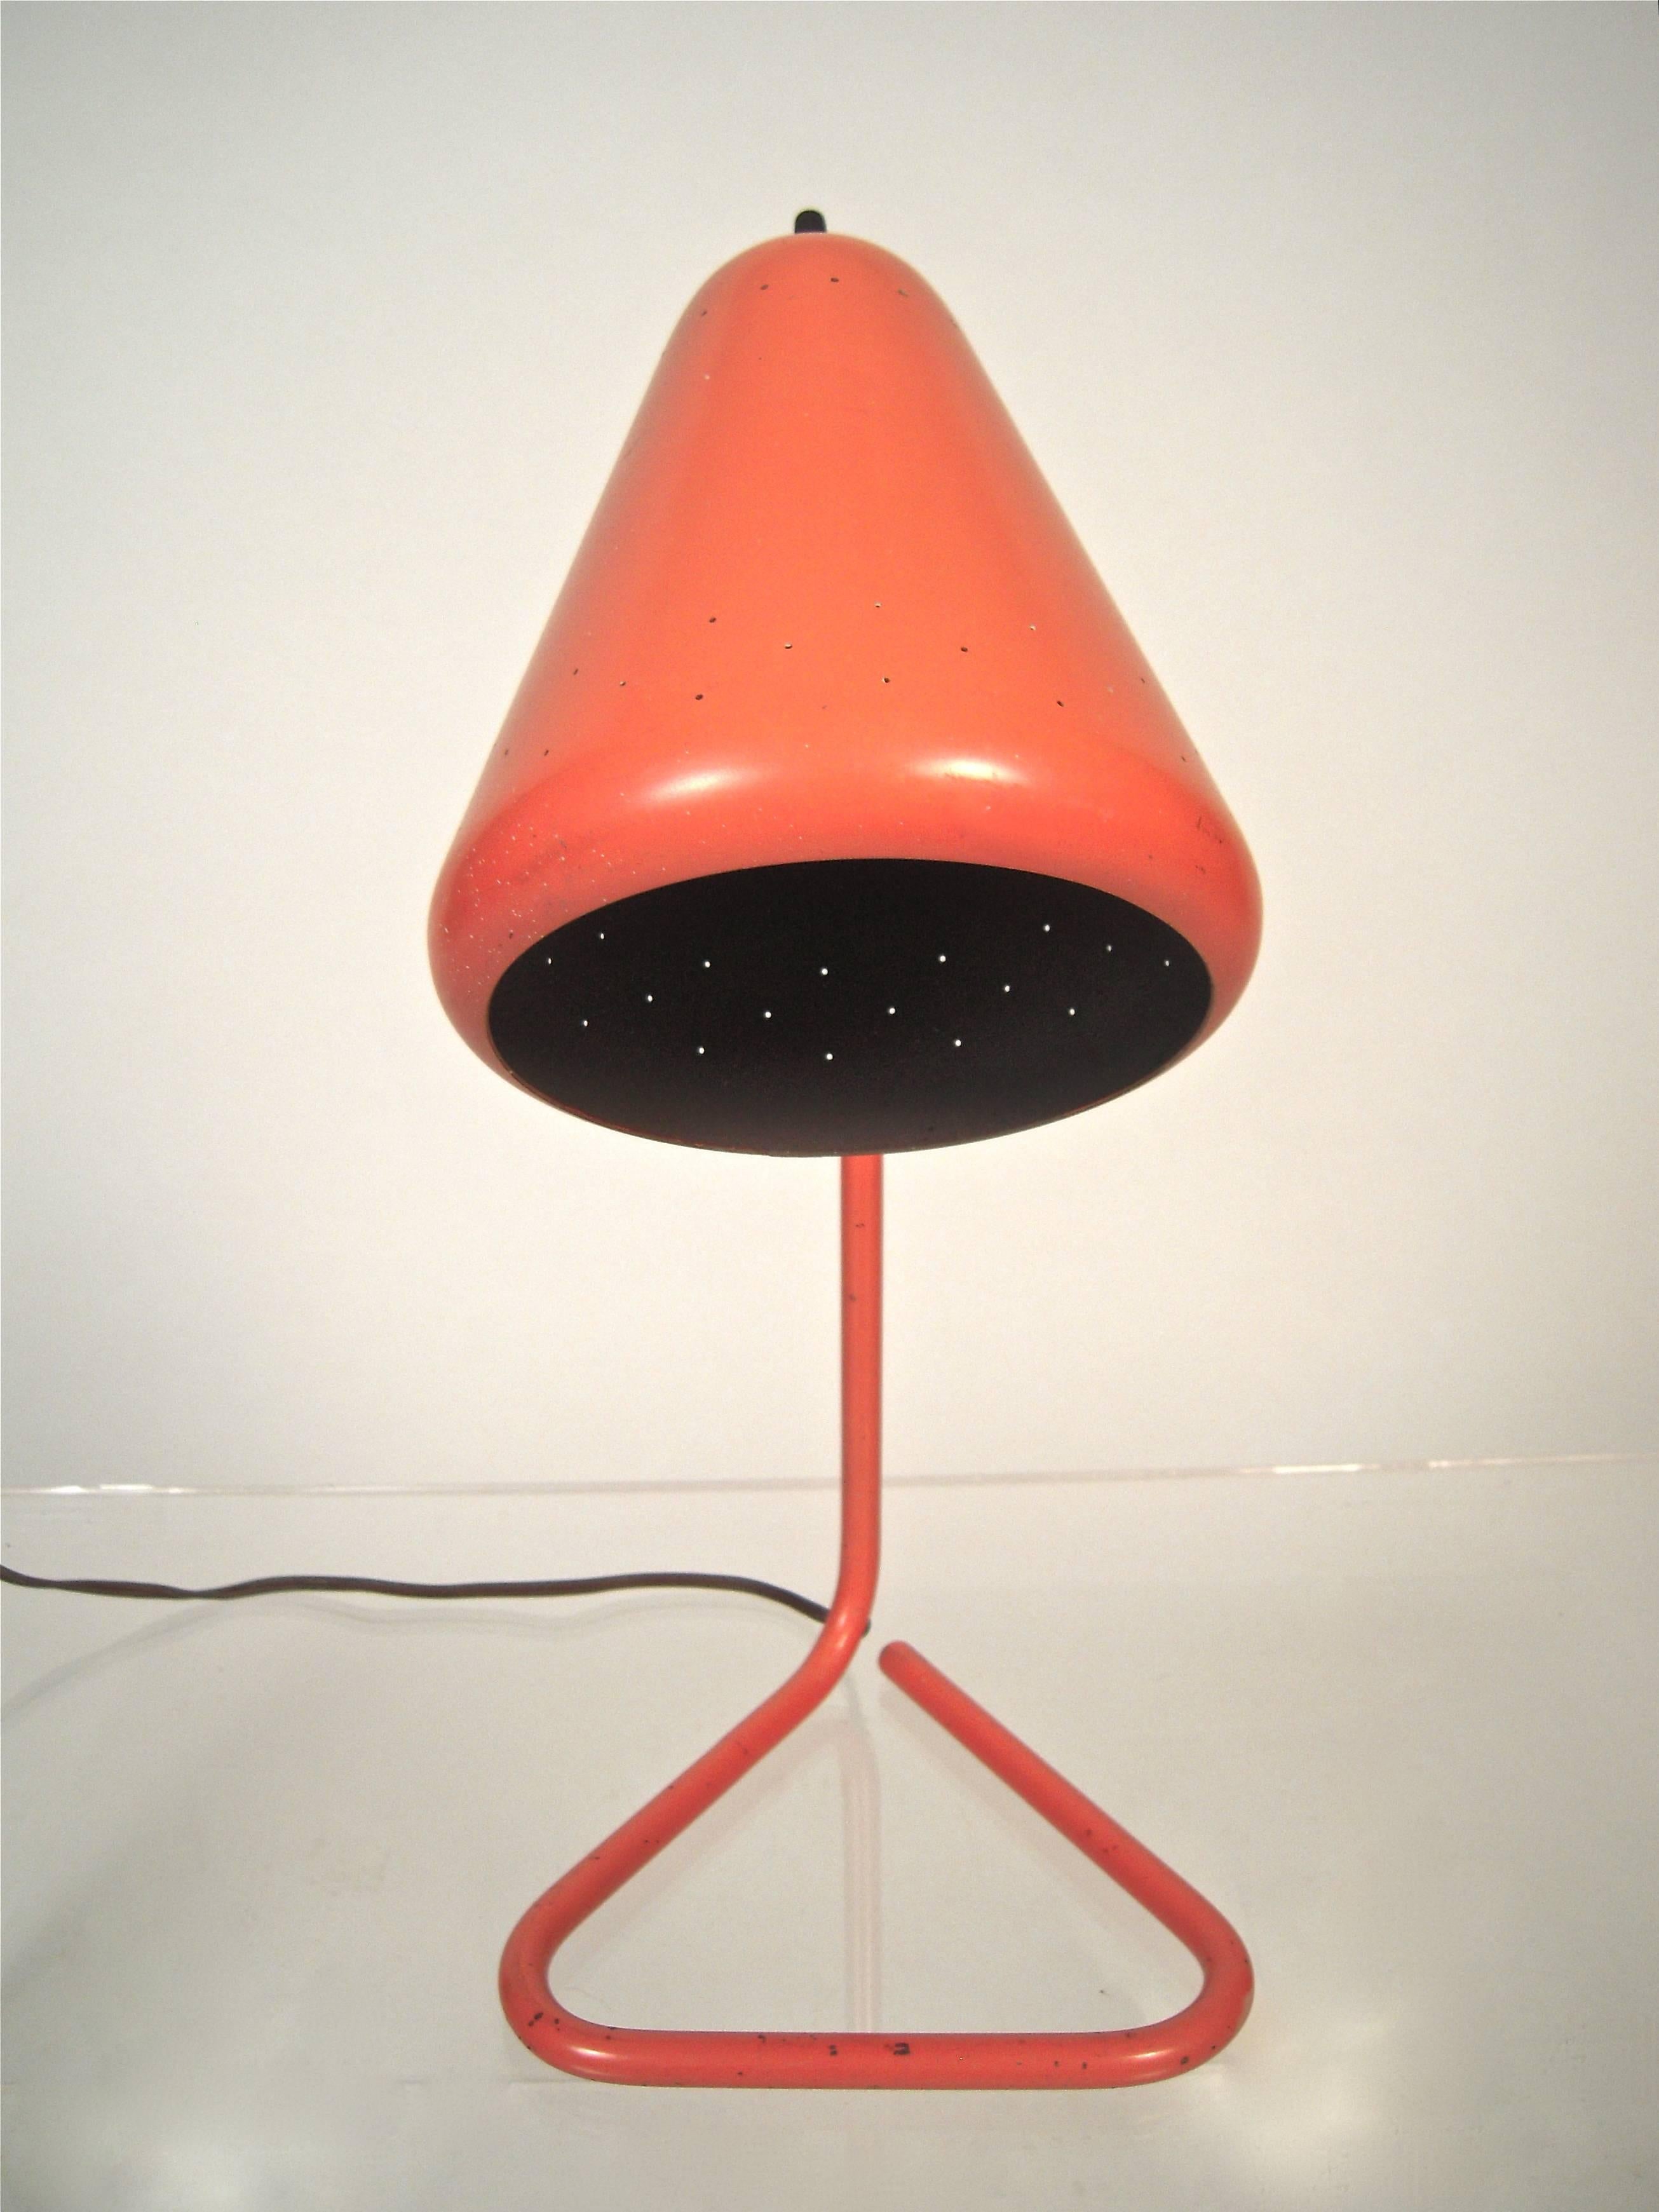 An adjustable desk lamp by Kurt Versen (1901-1997) in a beautiful coral color, American, circa 1950, the conical shade, perforated with three rows of small decorative circles to let light through, which can move up or down, supported by a tubular